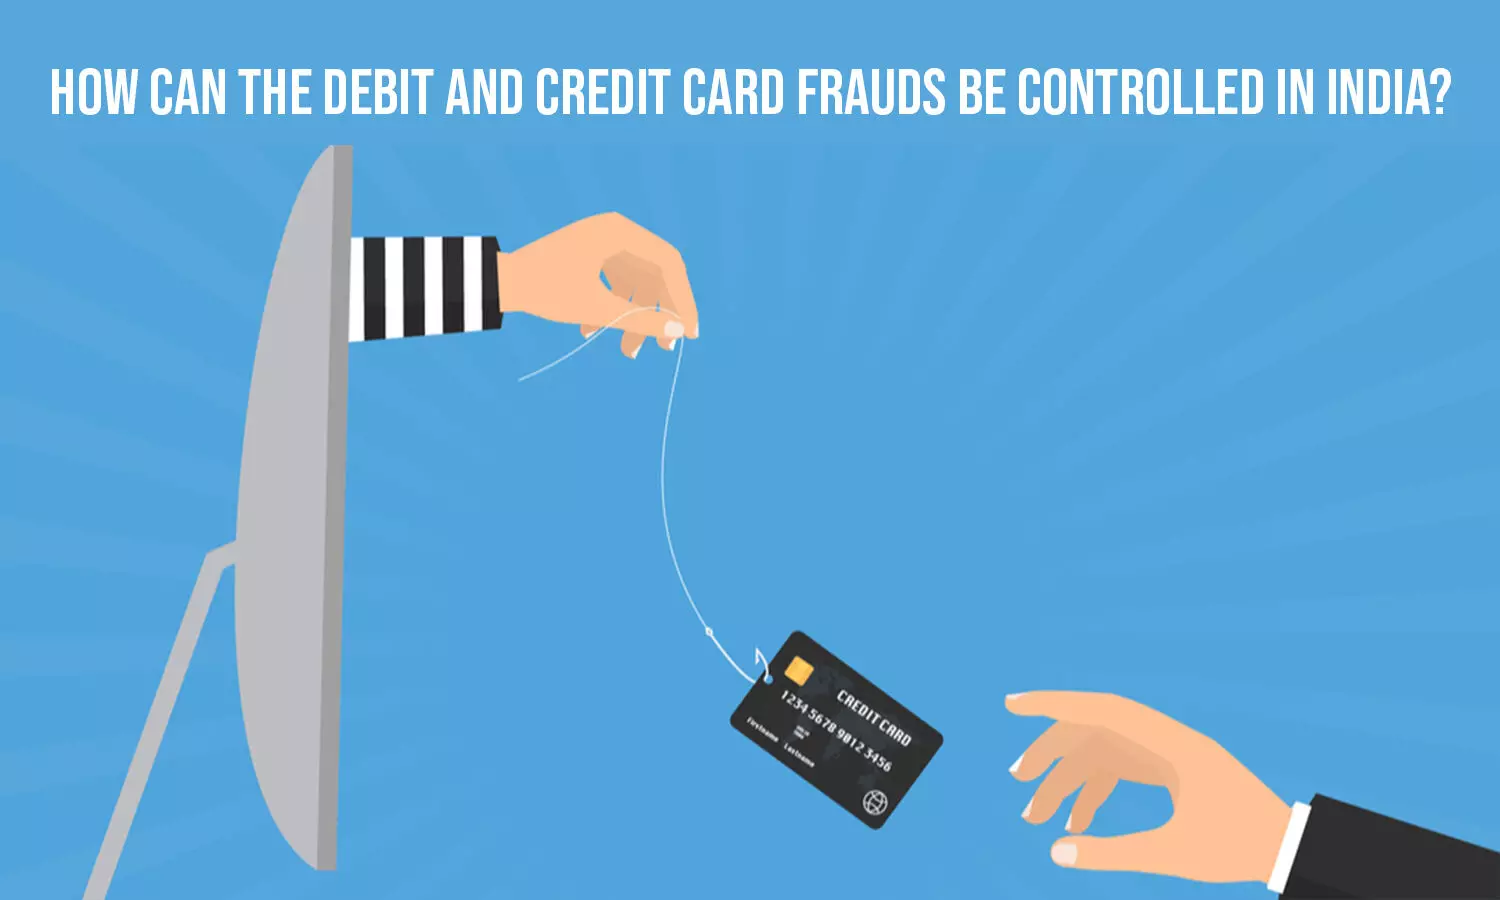 How can the Debit and Credit Card frauds be controlled in India?